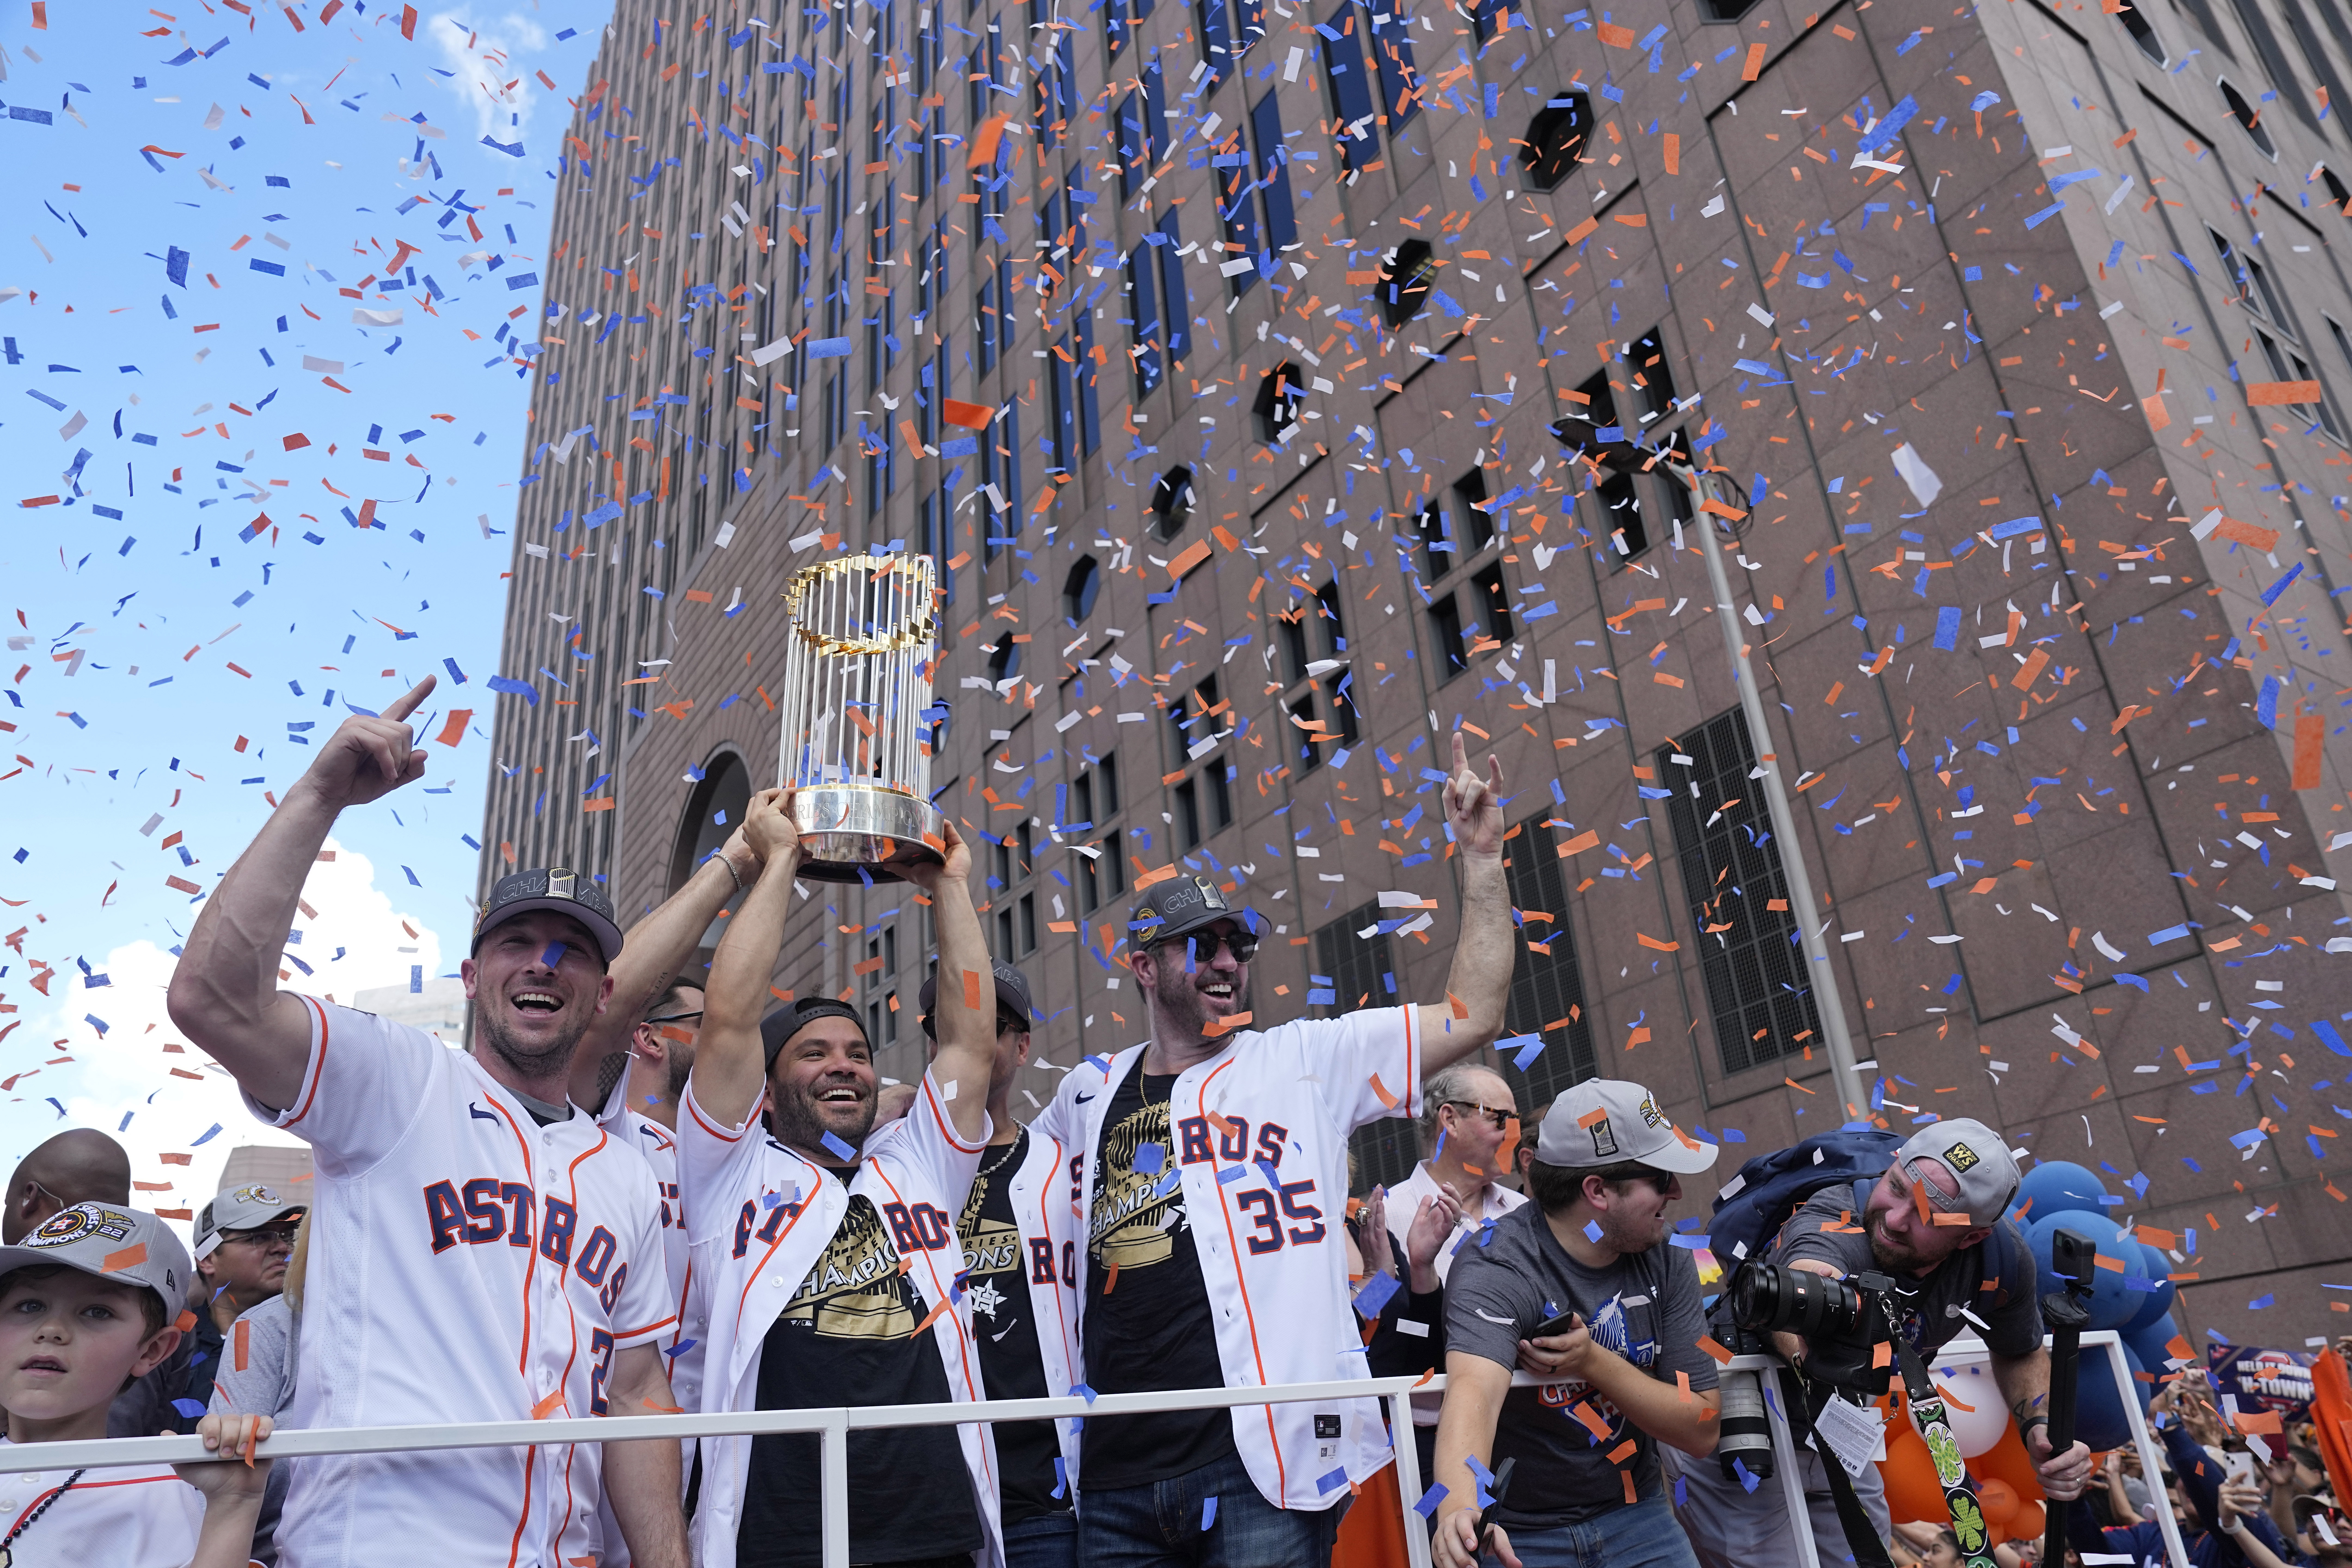 When is the Astros World Series championship parade? - Sports